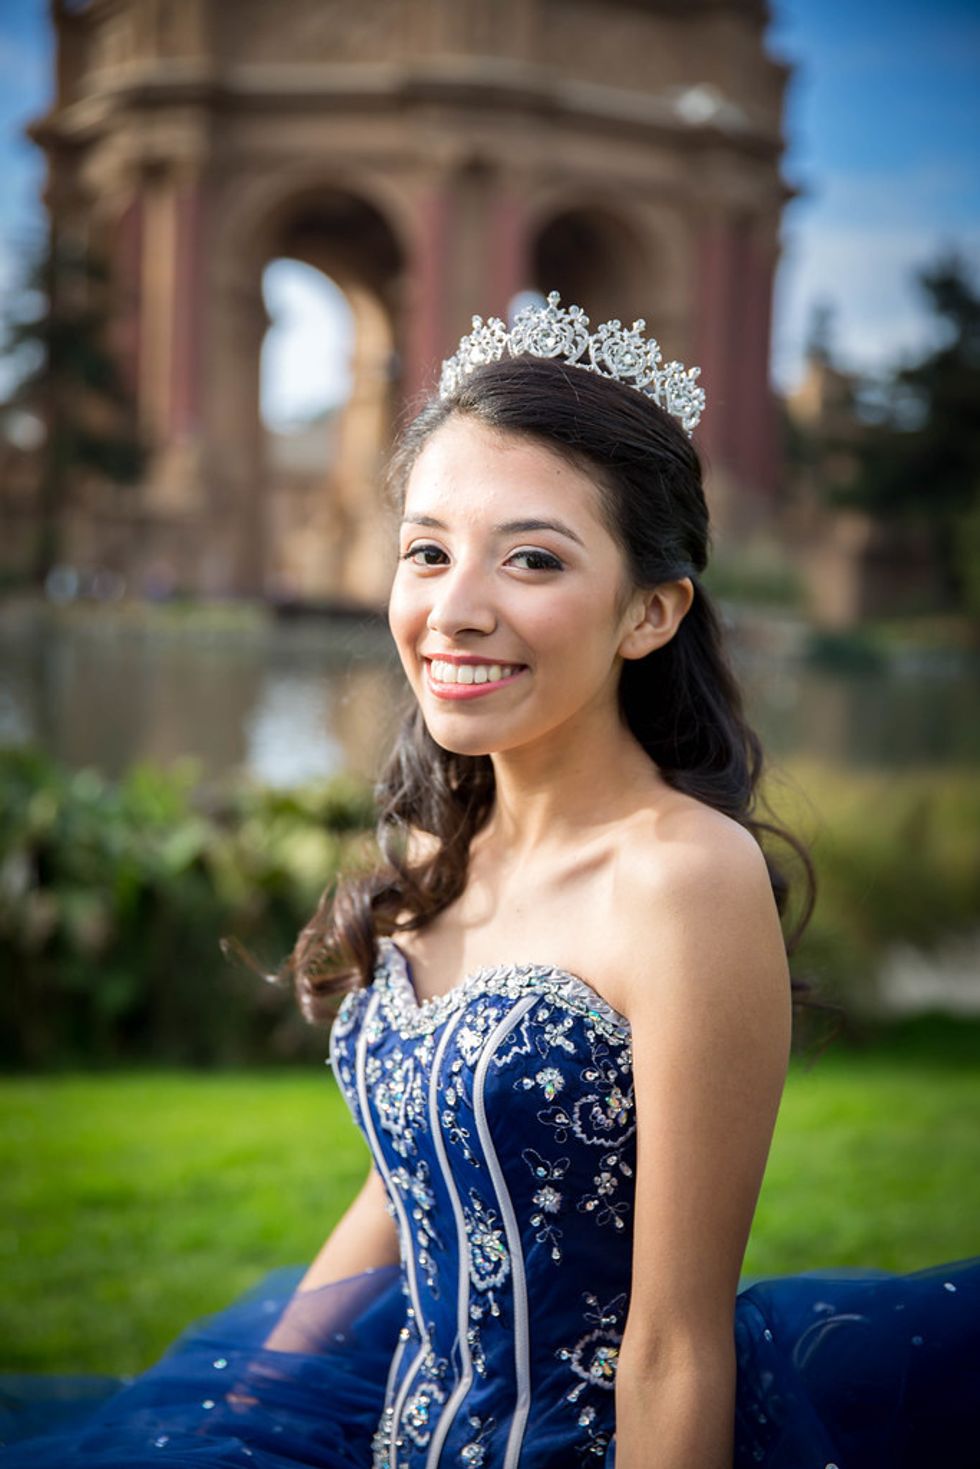 10 Things To Know About A Quinceañera?